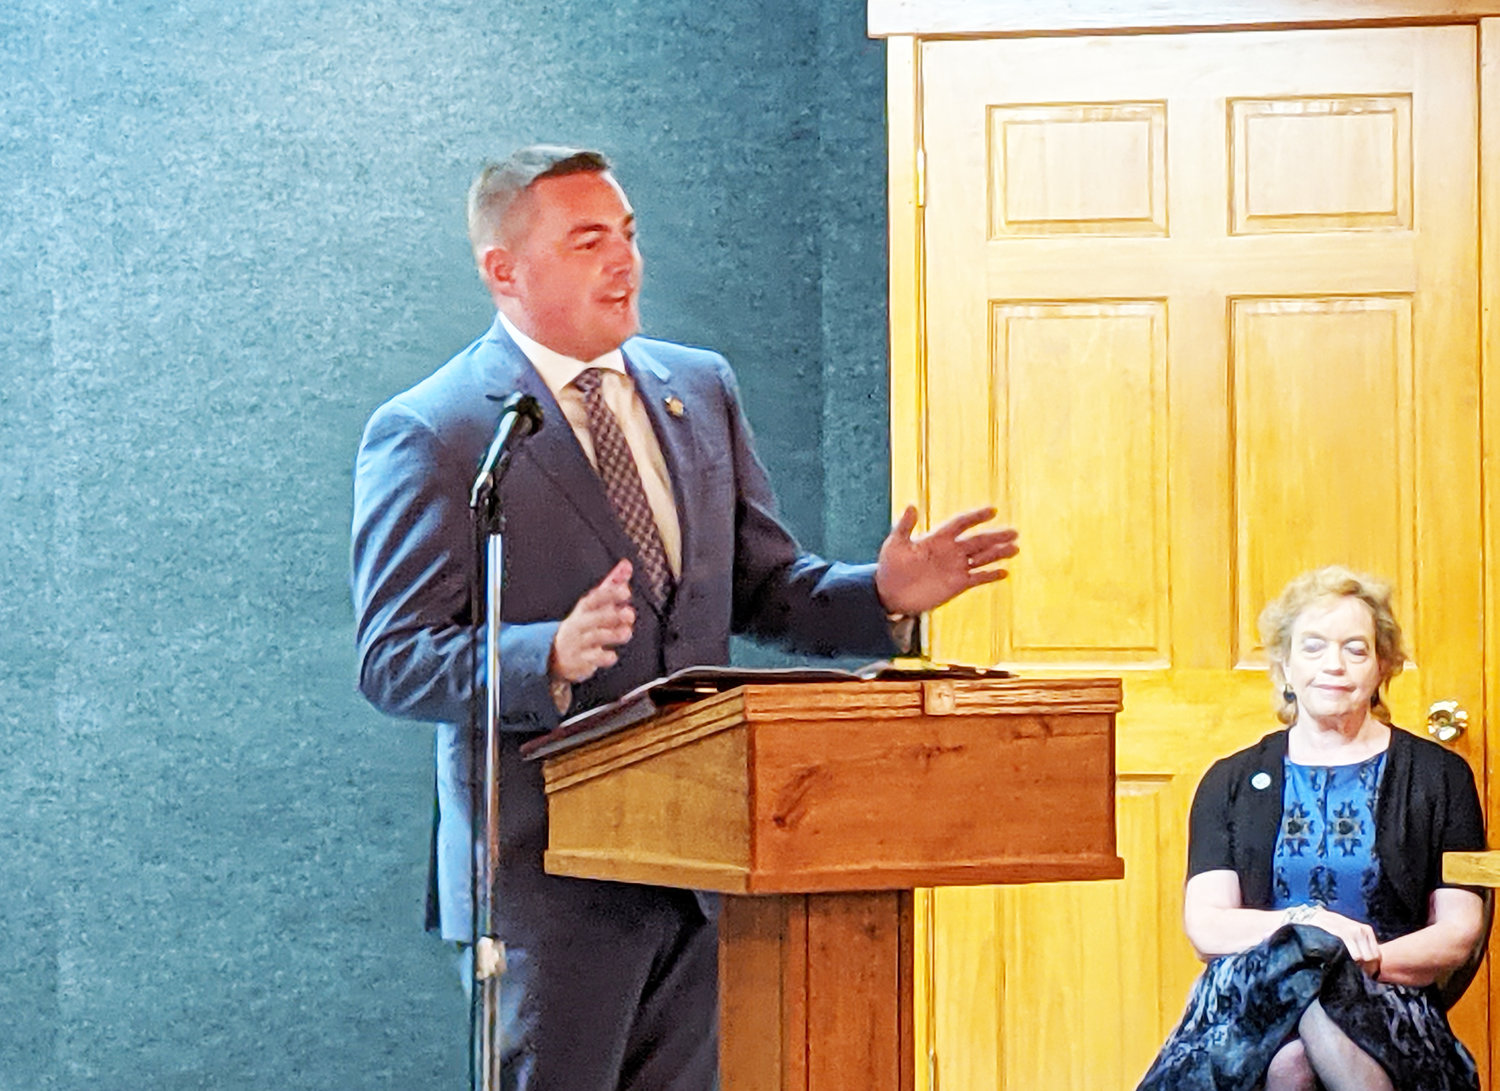 New Your Senator Mike Martucci shares his thoughts on protecting the Upper Delaware region as keynote speaker at the Upper Delaware Council’s 33rd Annual Awards Ceremony. Upper Delaware Council director Laurie Ramie (seated) listens.